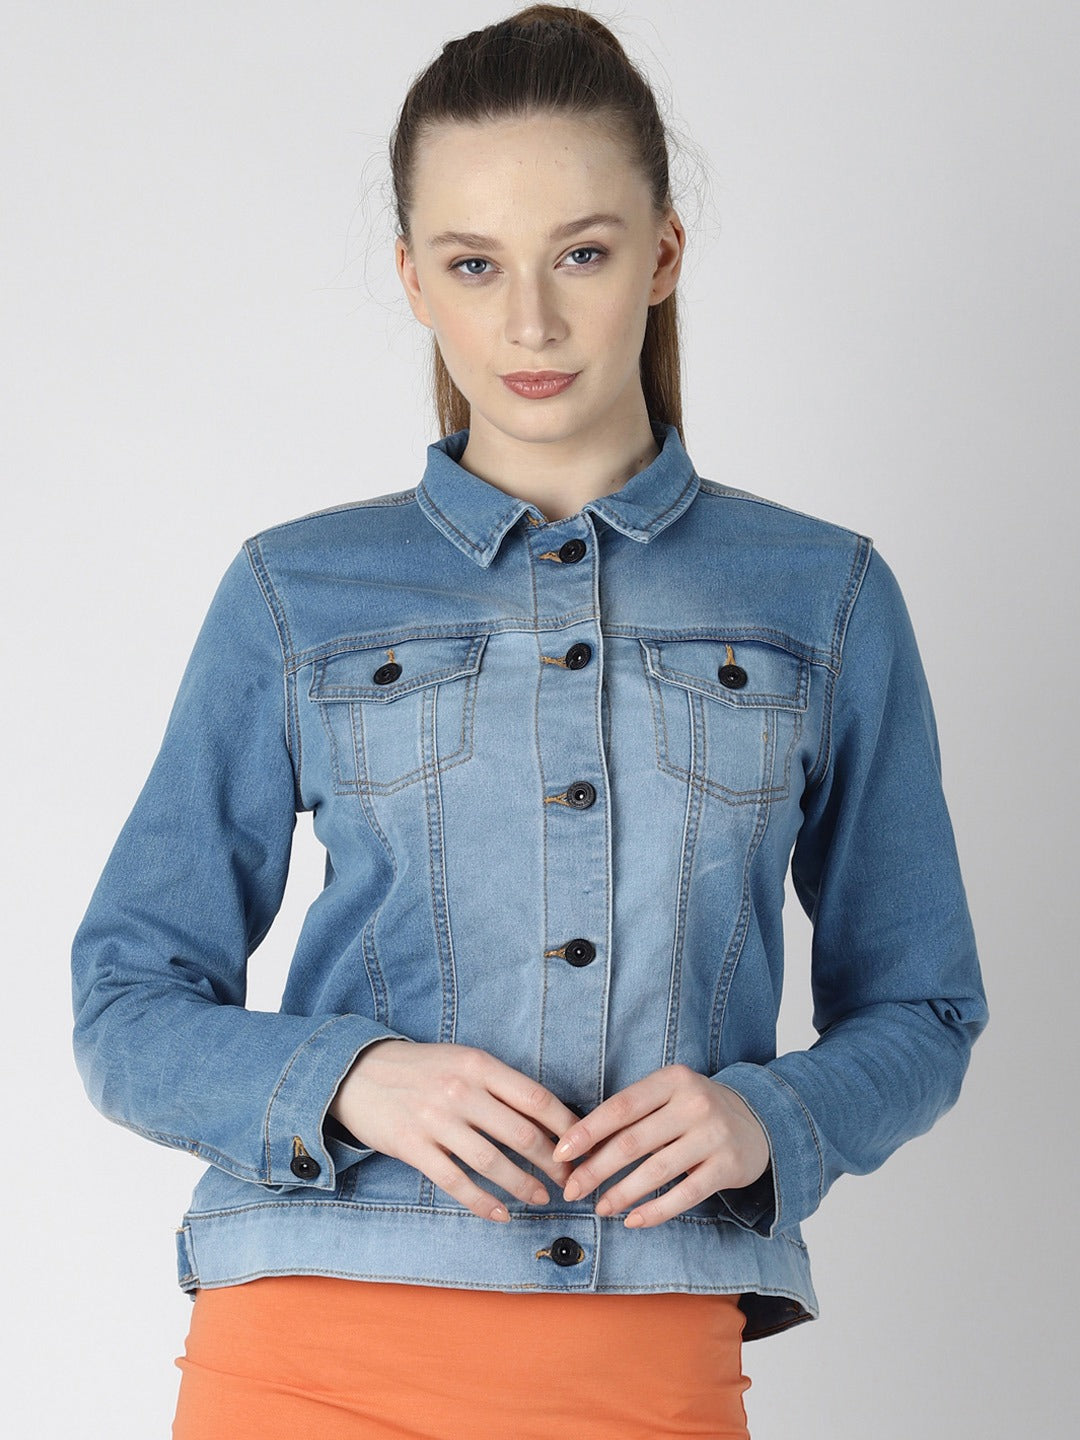 Blue women's jacket with denim texture and button-up design, showcasing a stylish and casual fashion look.